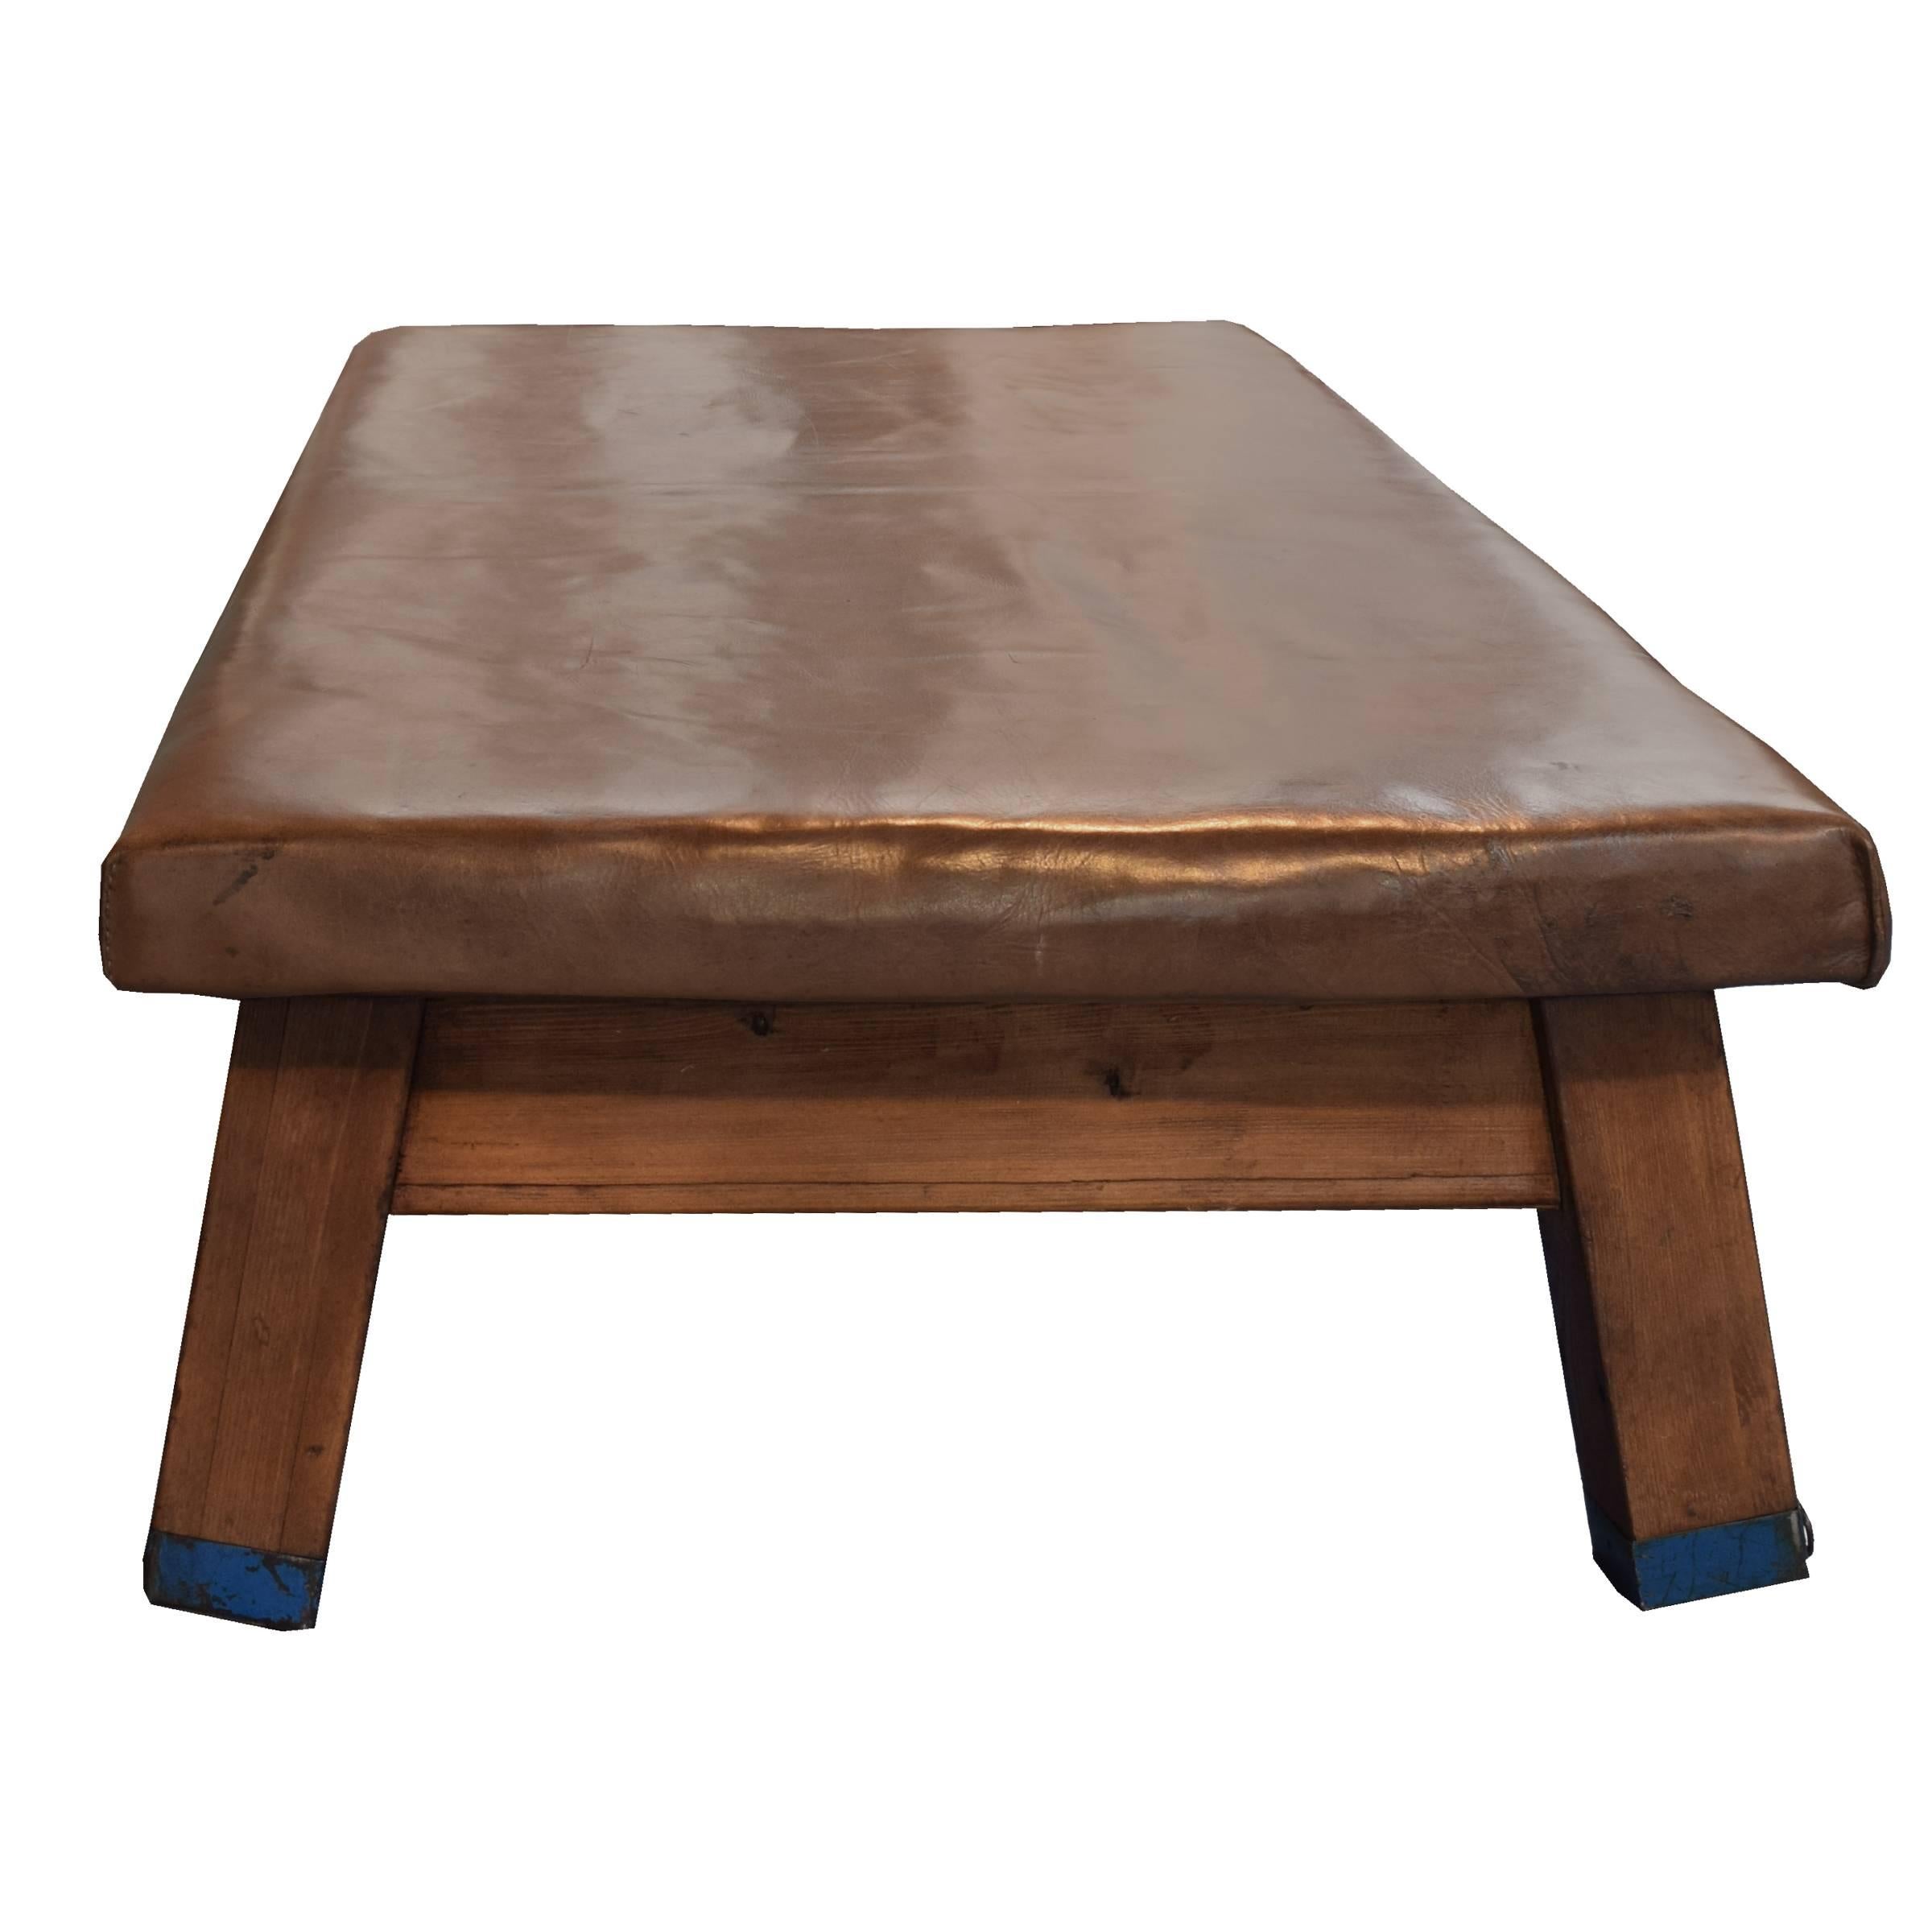 Czech Wood and Leather Vaulting Bench or Table